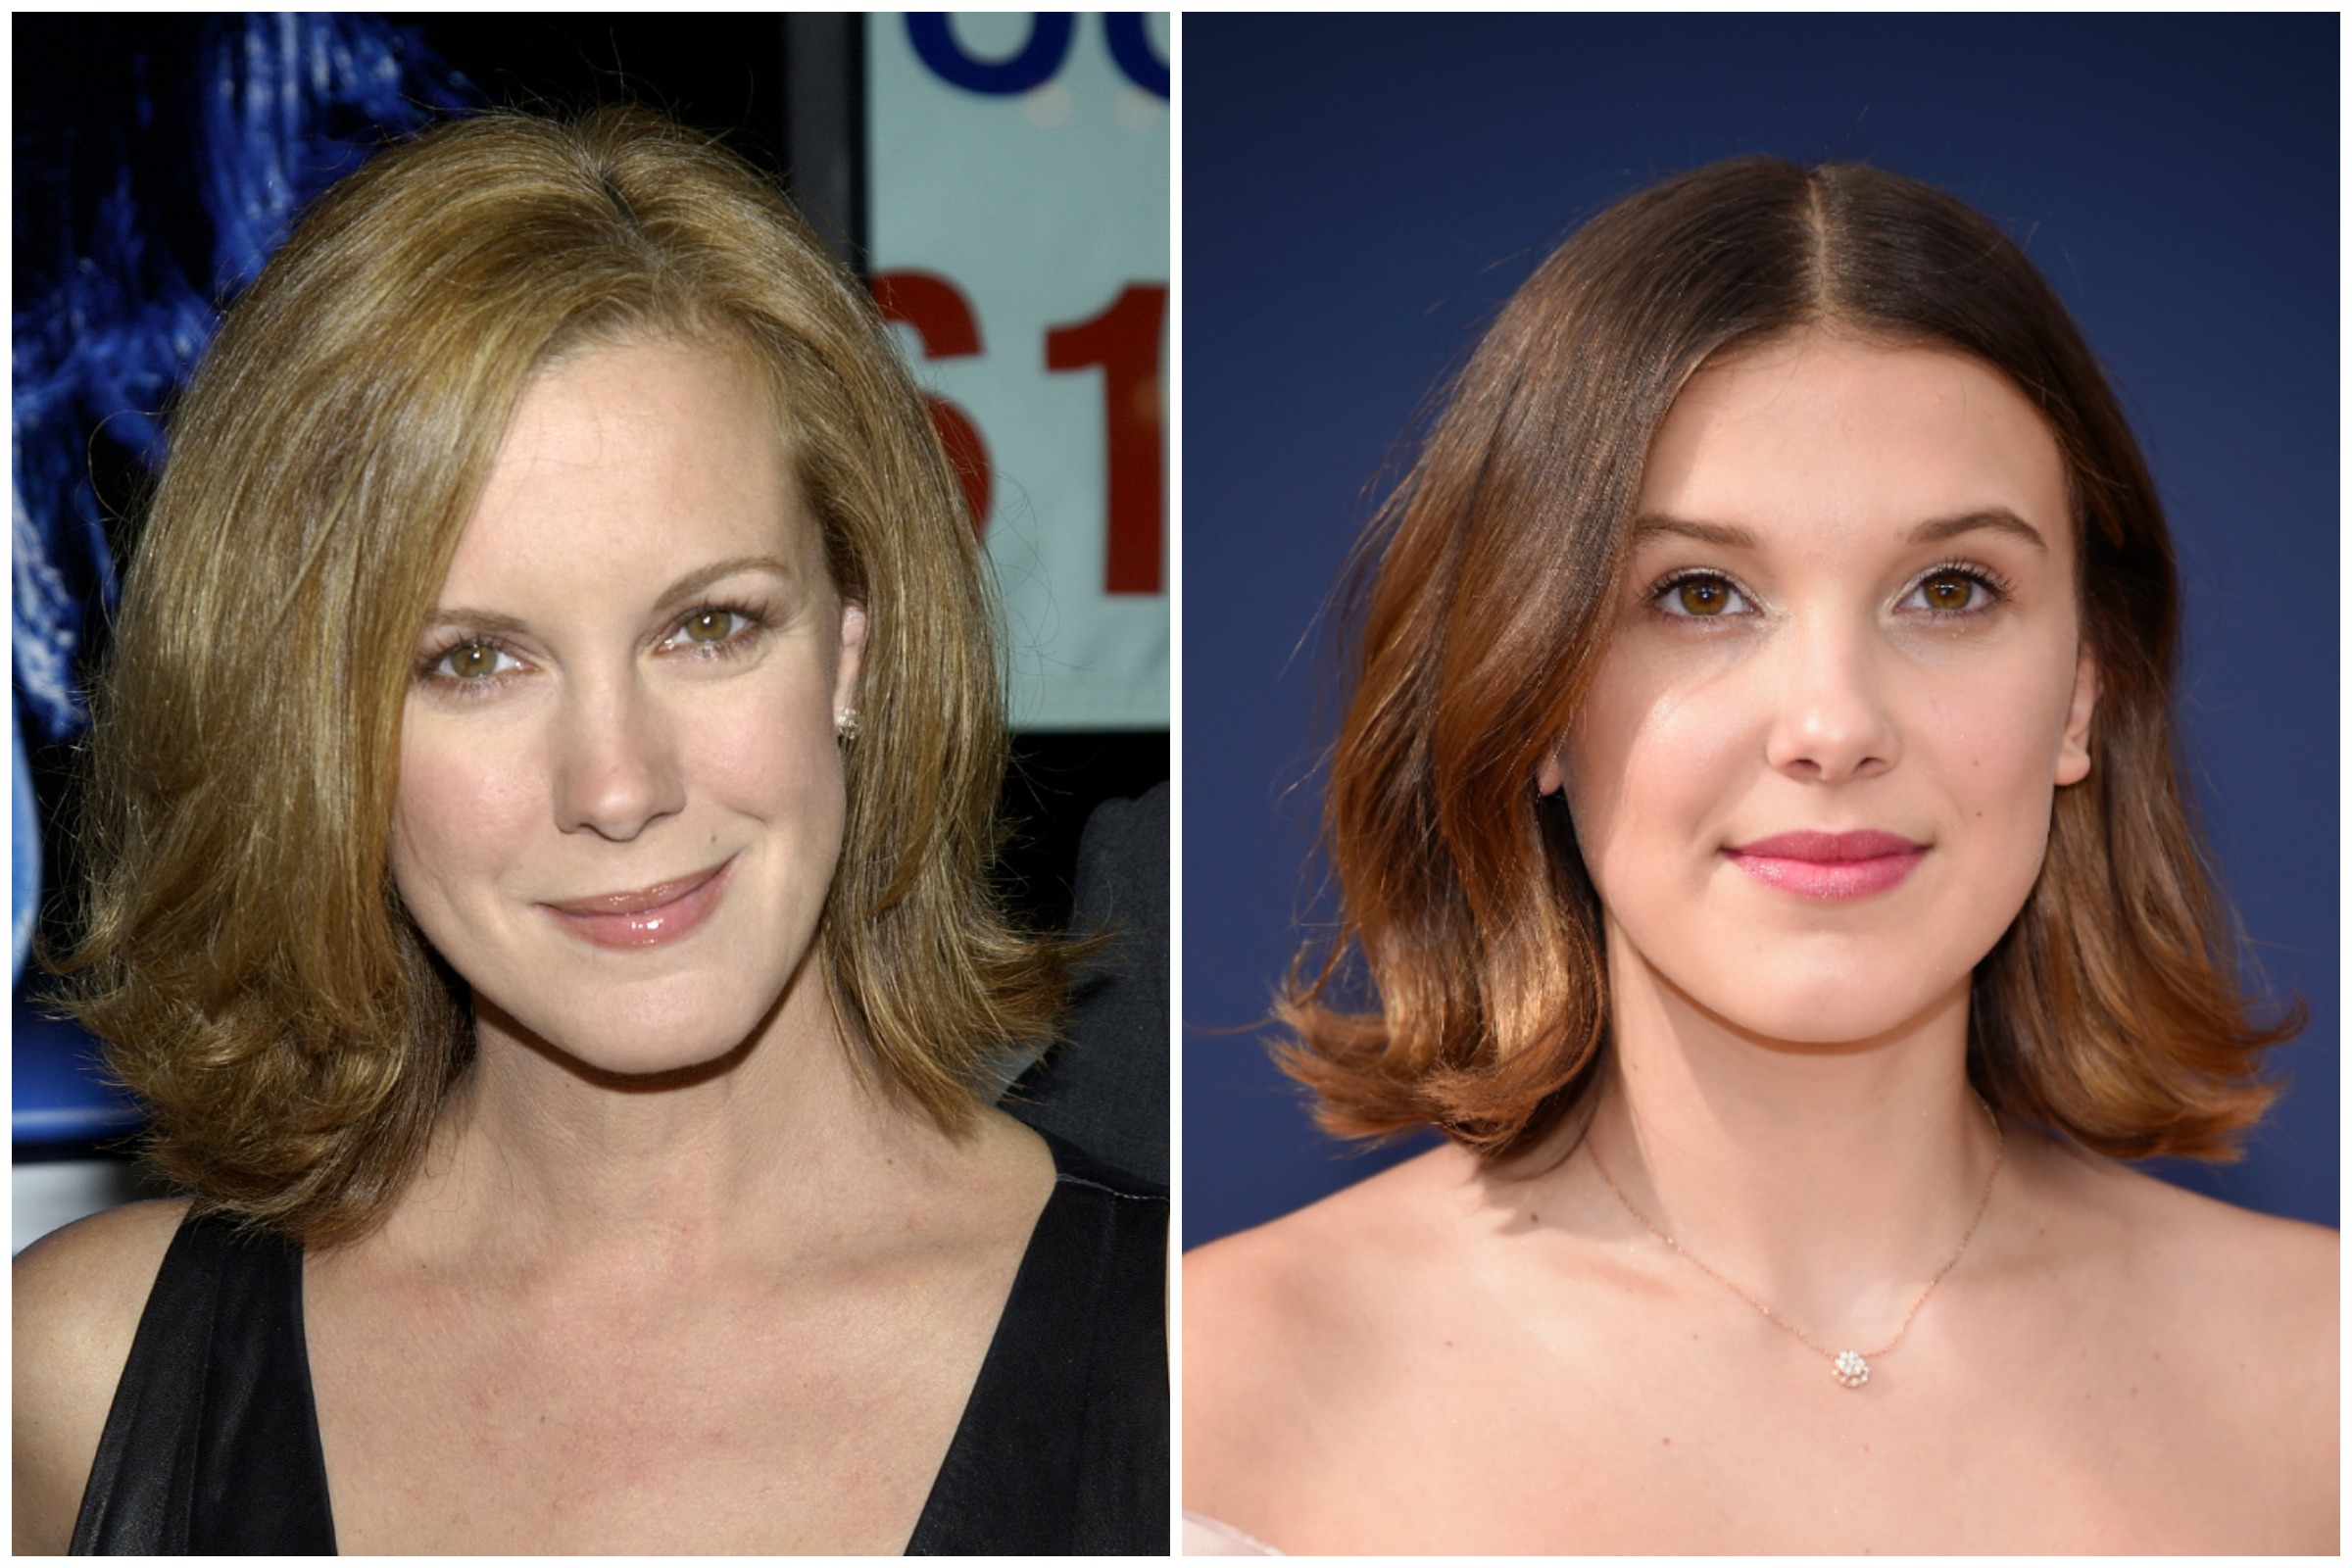 Elizabeth perkins related to millie bobby brown